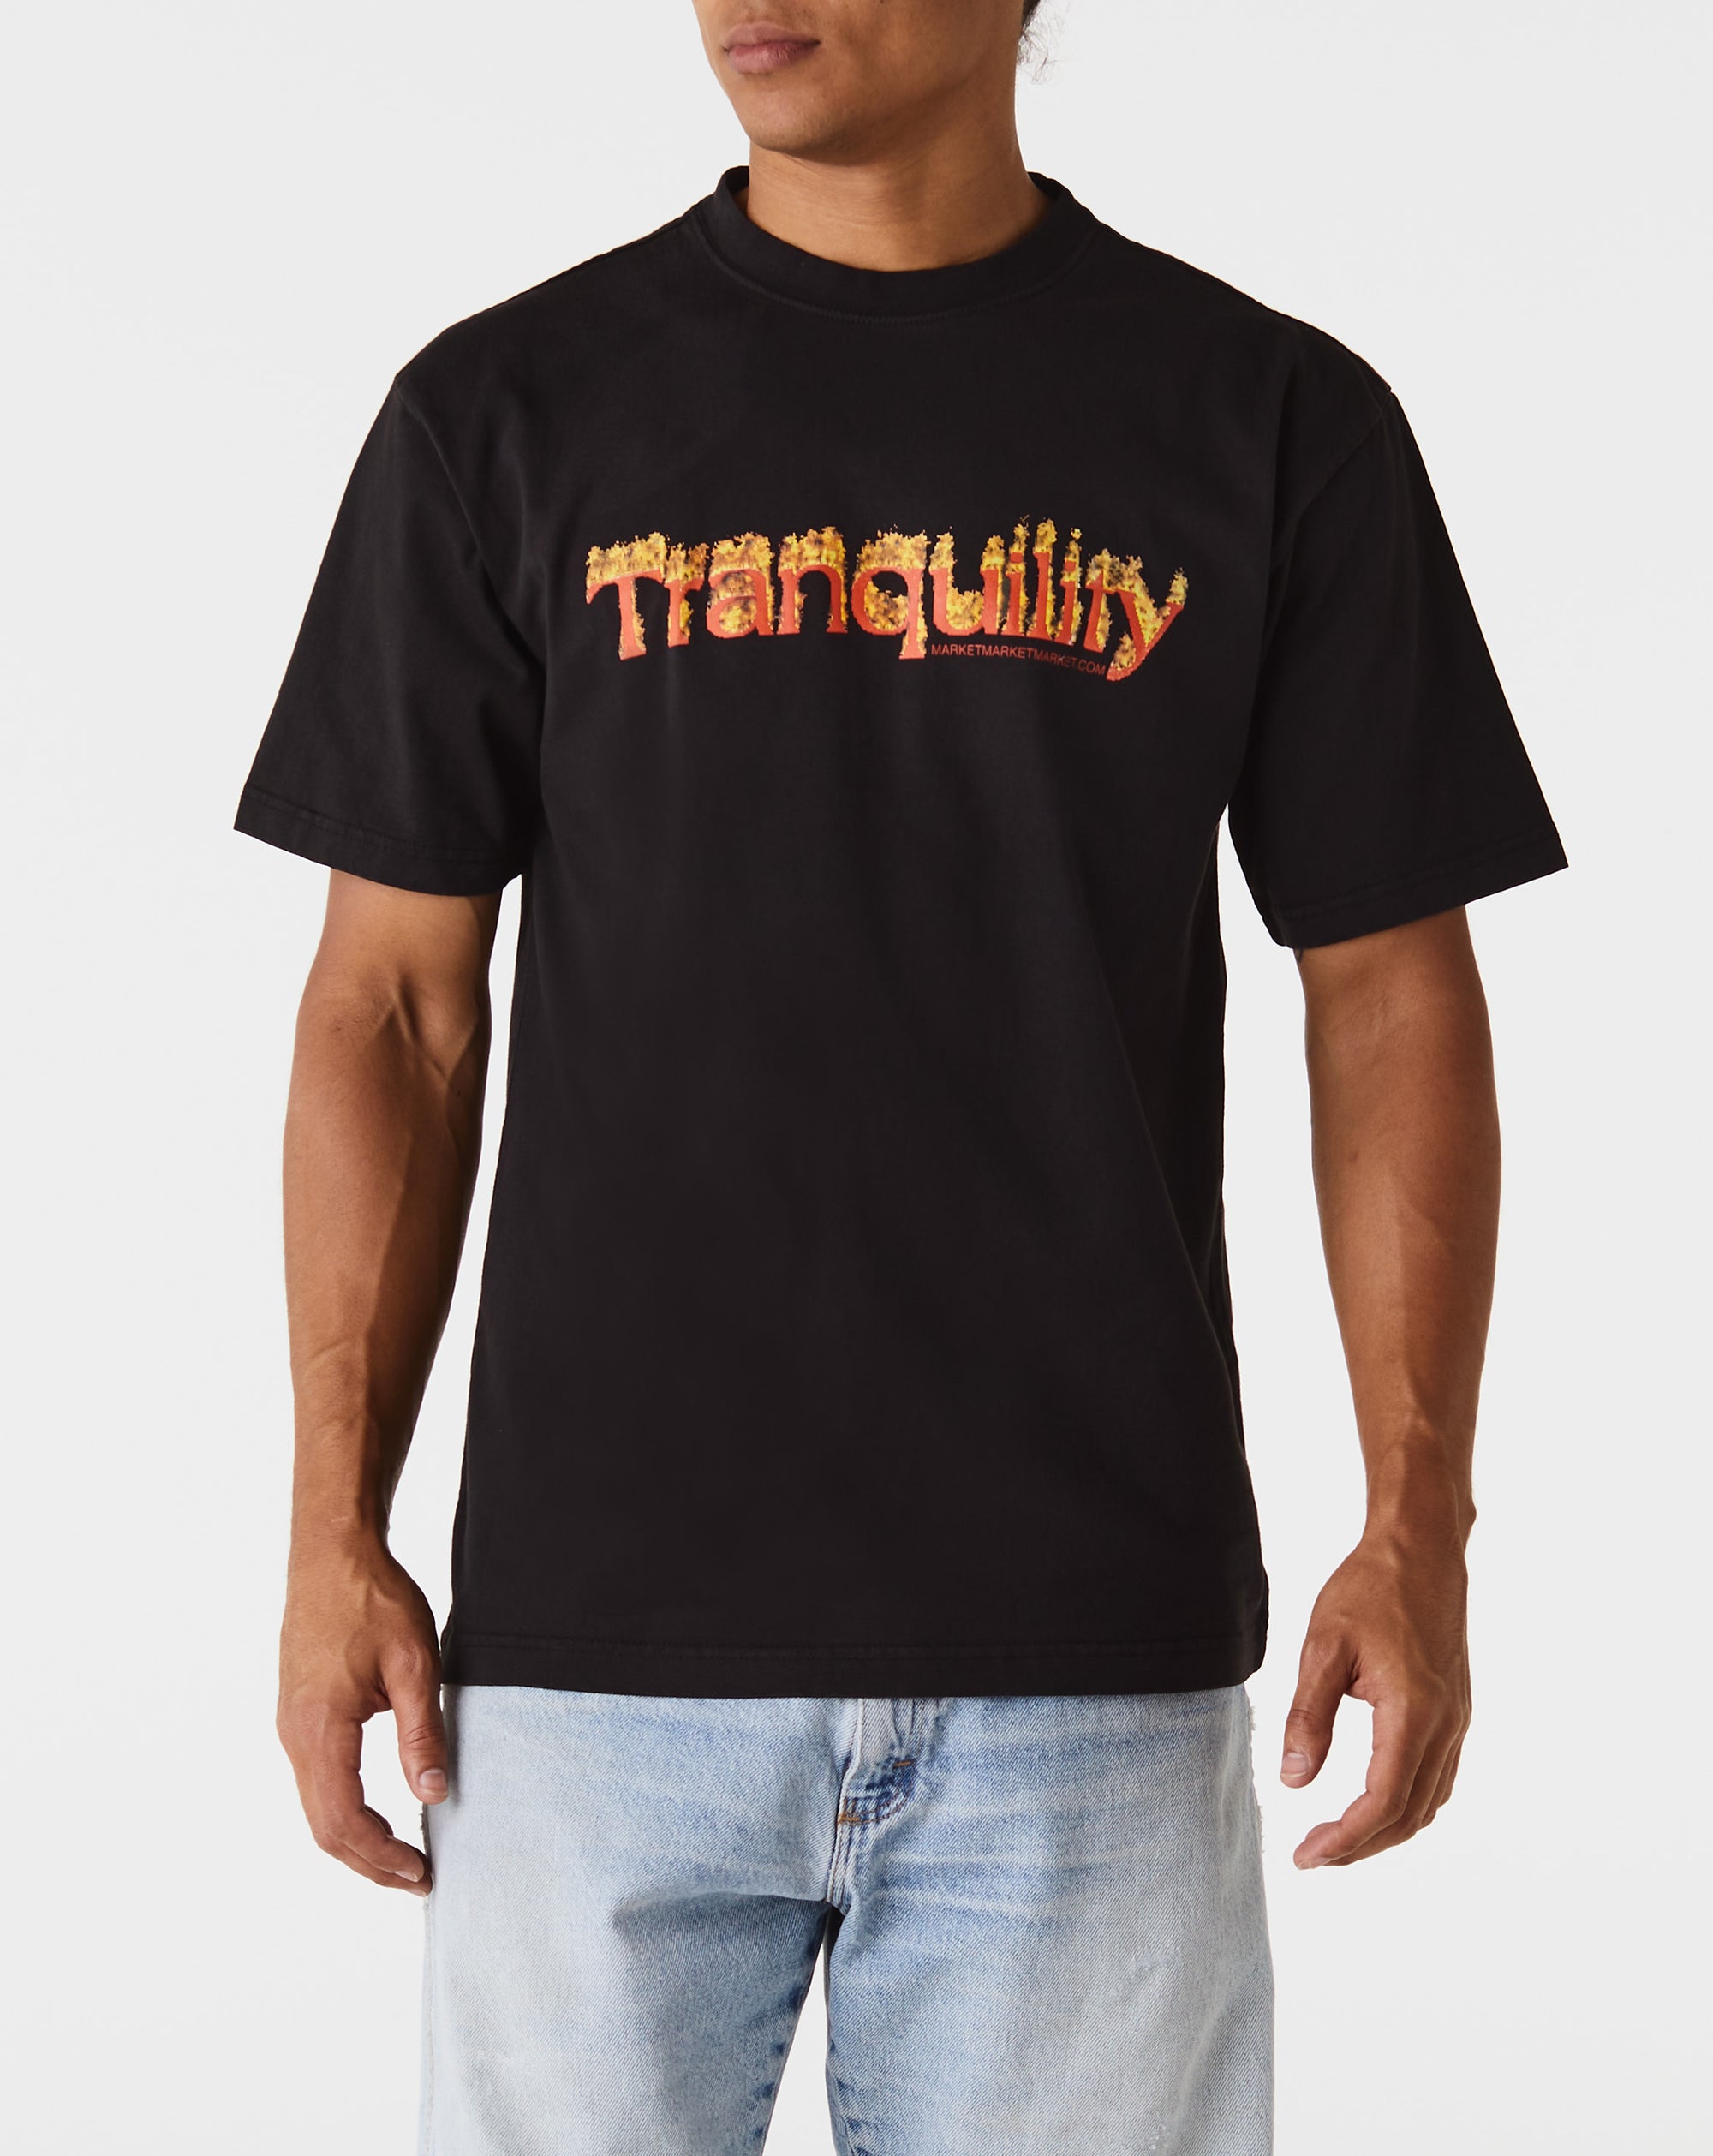 Market Tranquility T-Shirt - Rule of Next Apparel